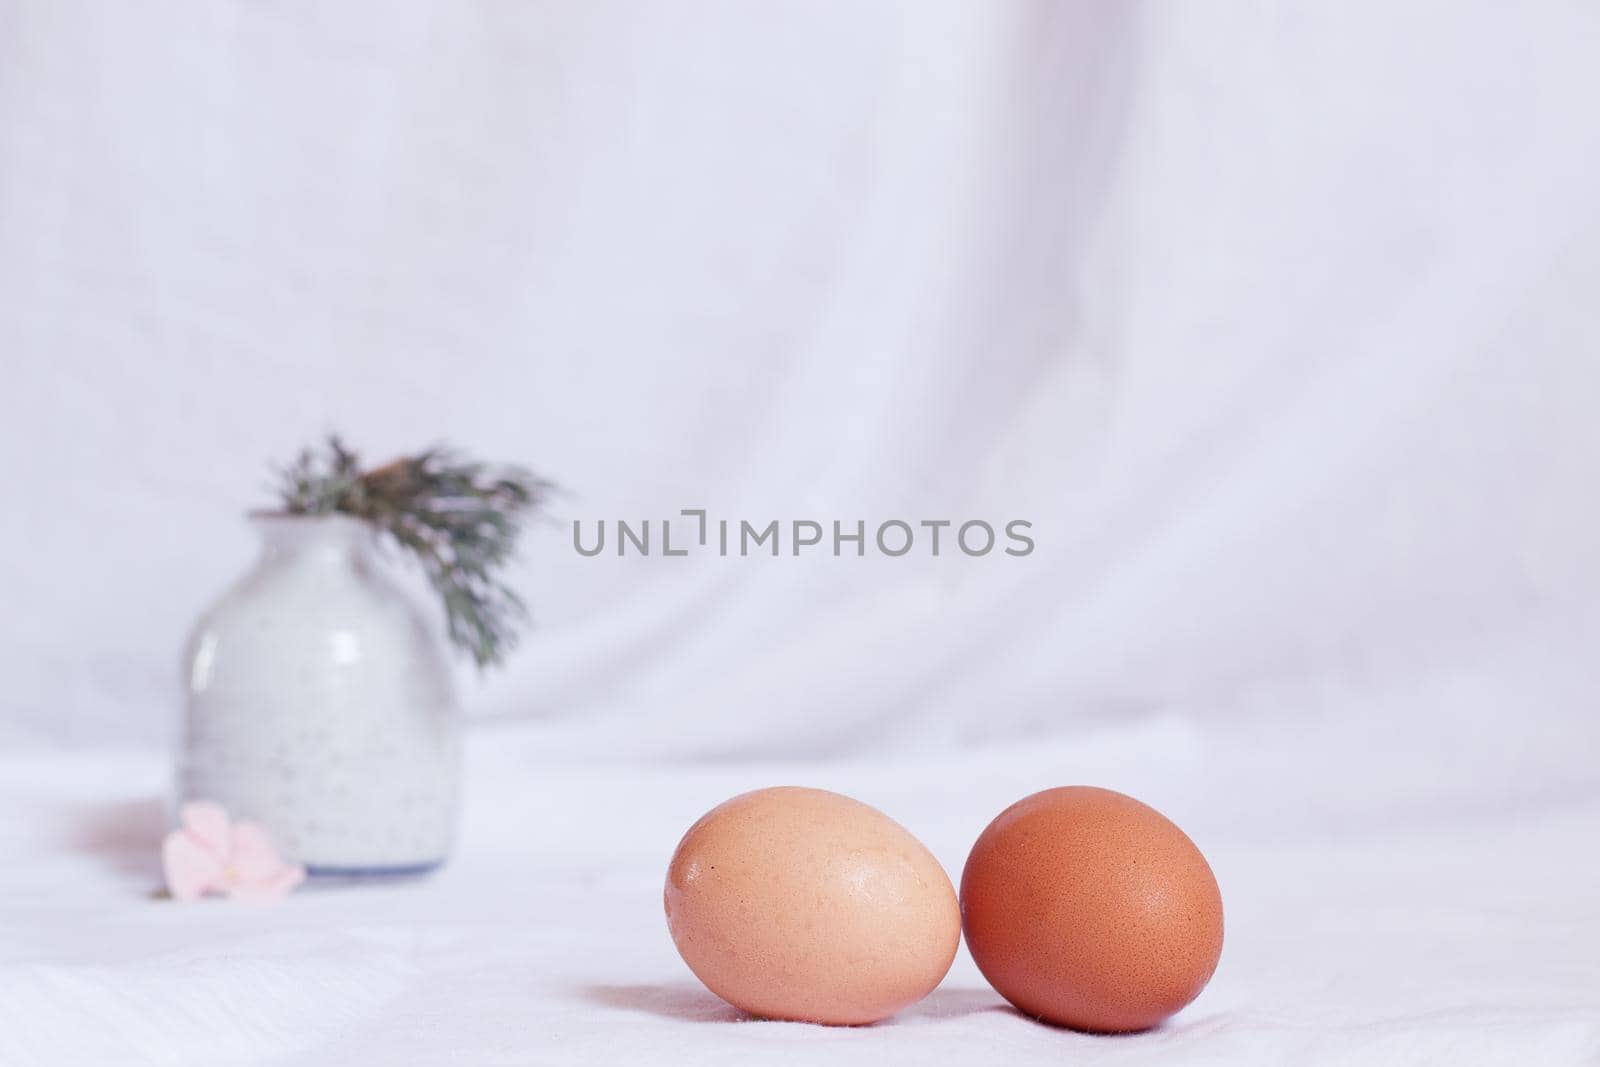 Bright and airy Easter aesthetic still life by Sonnet15